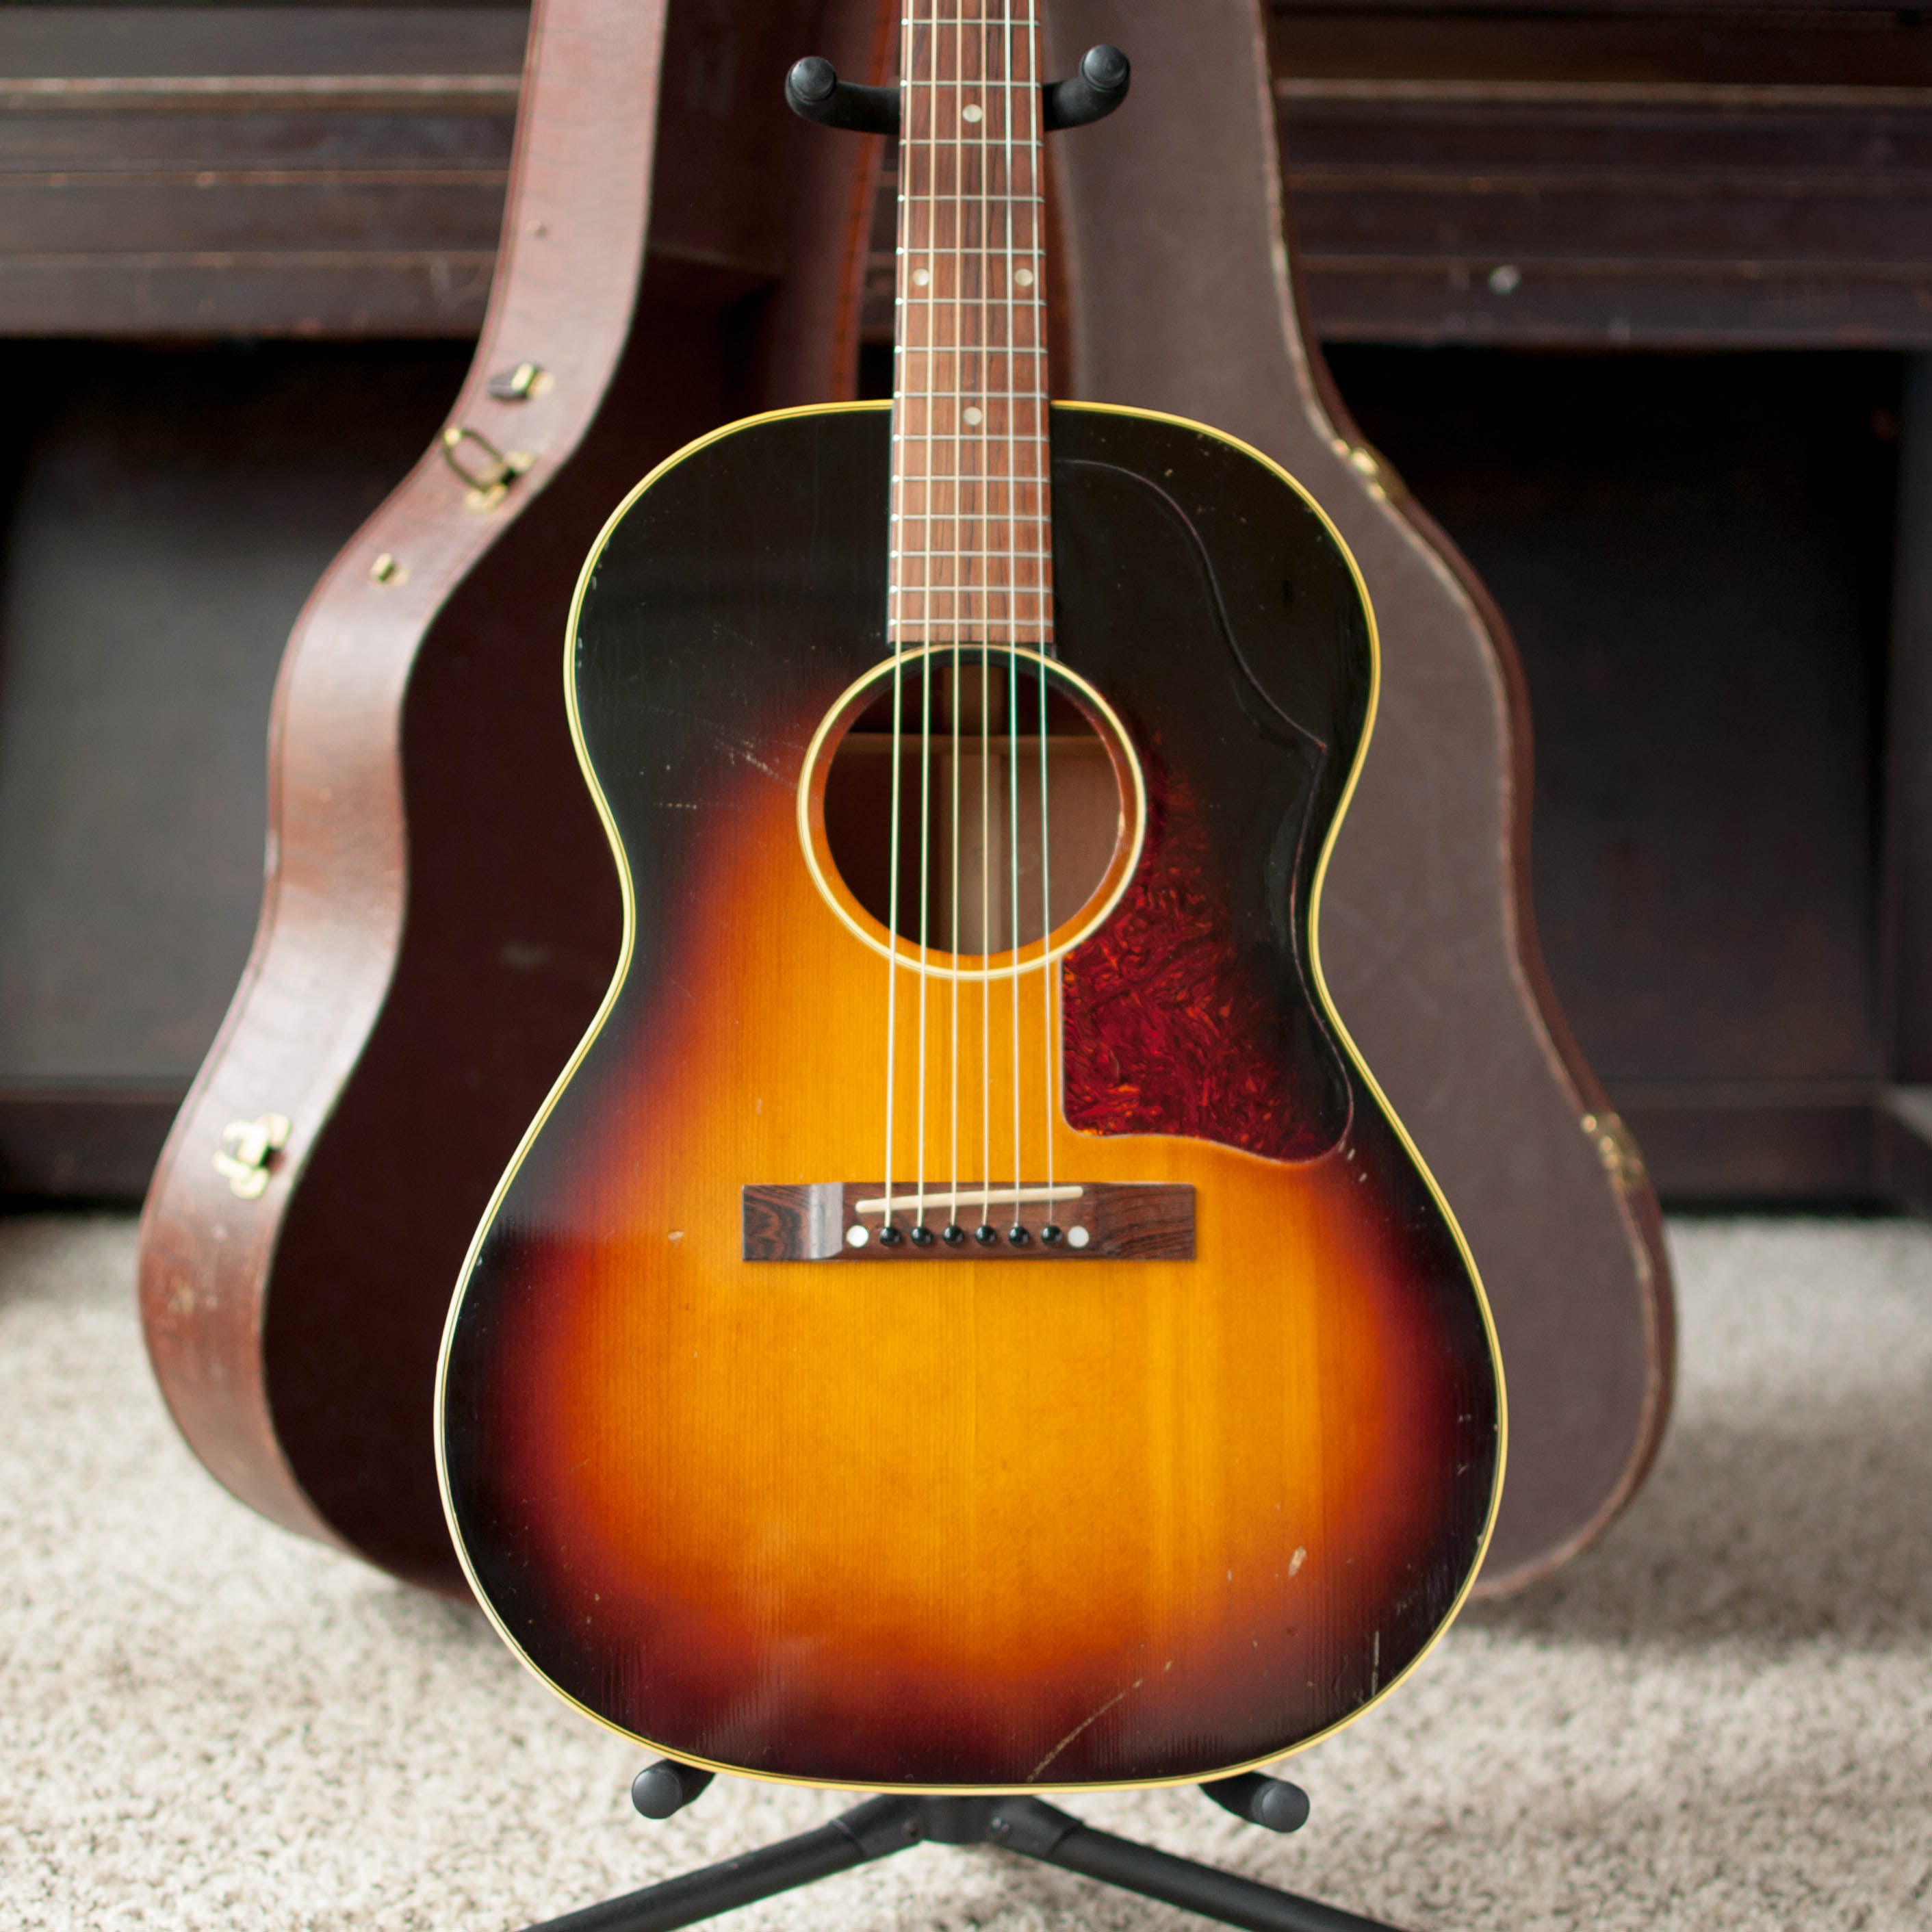 1950s Gibson acoustic guitar LG-2 1957